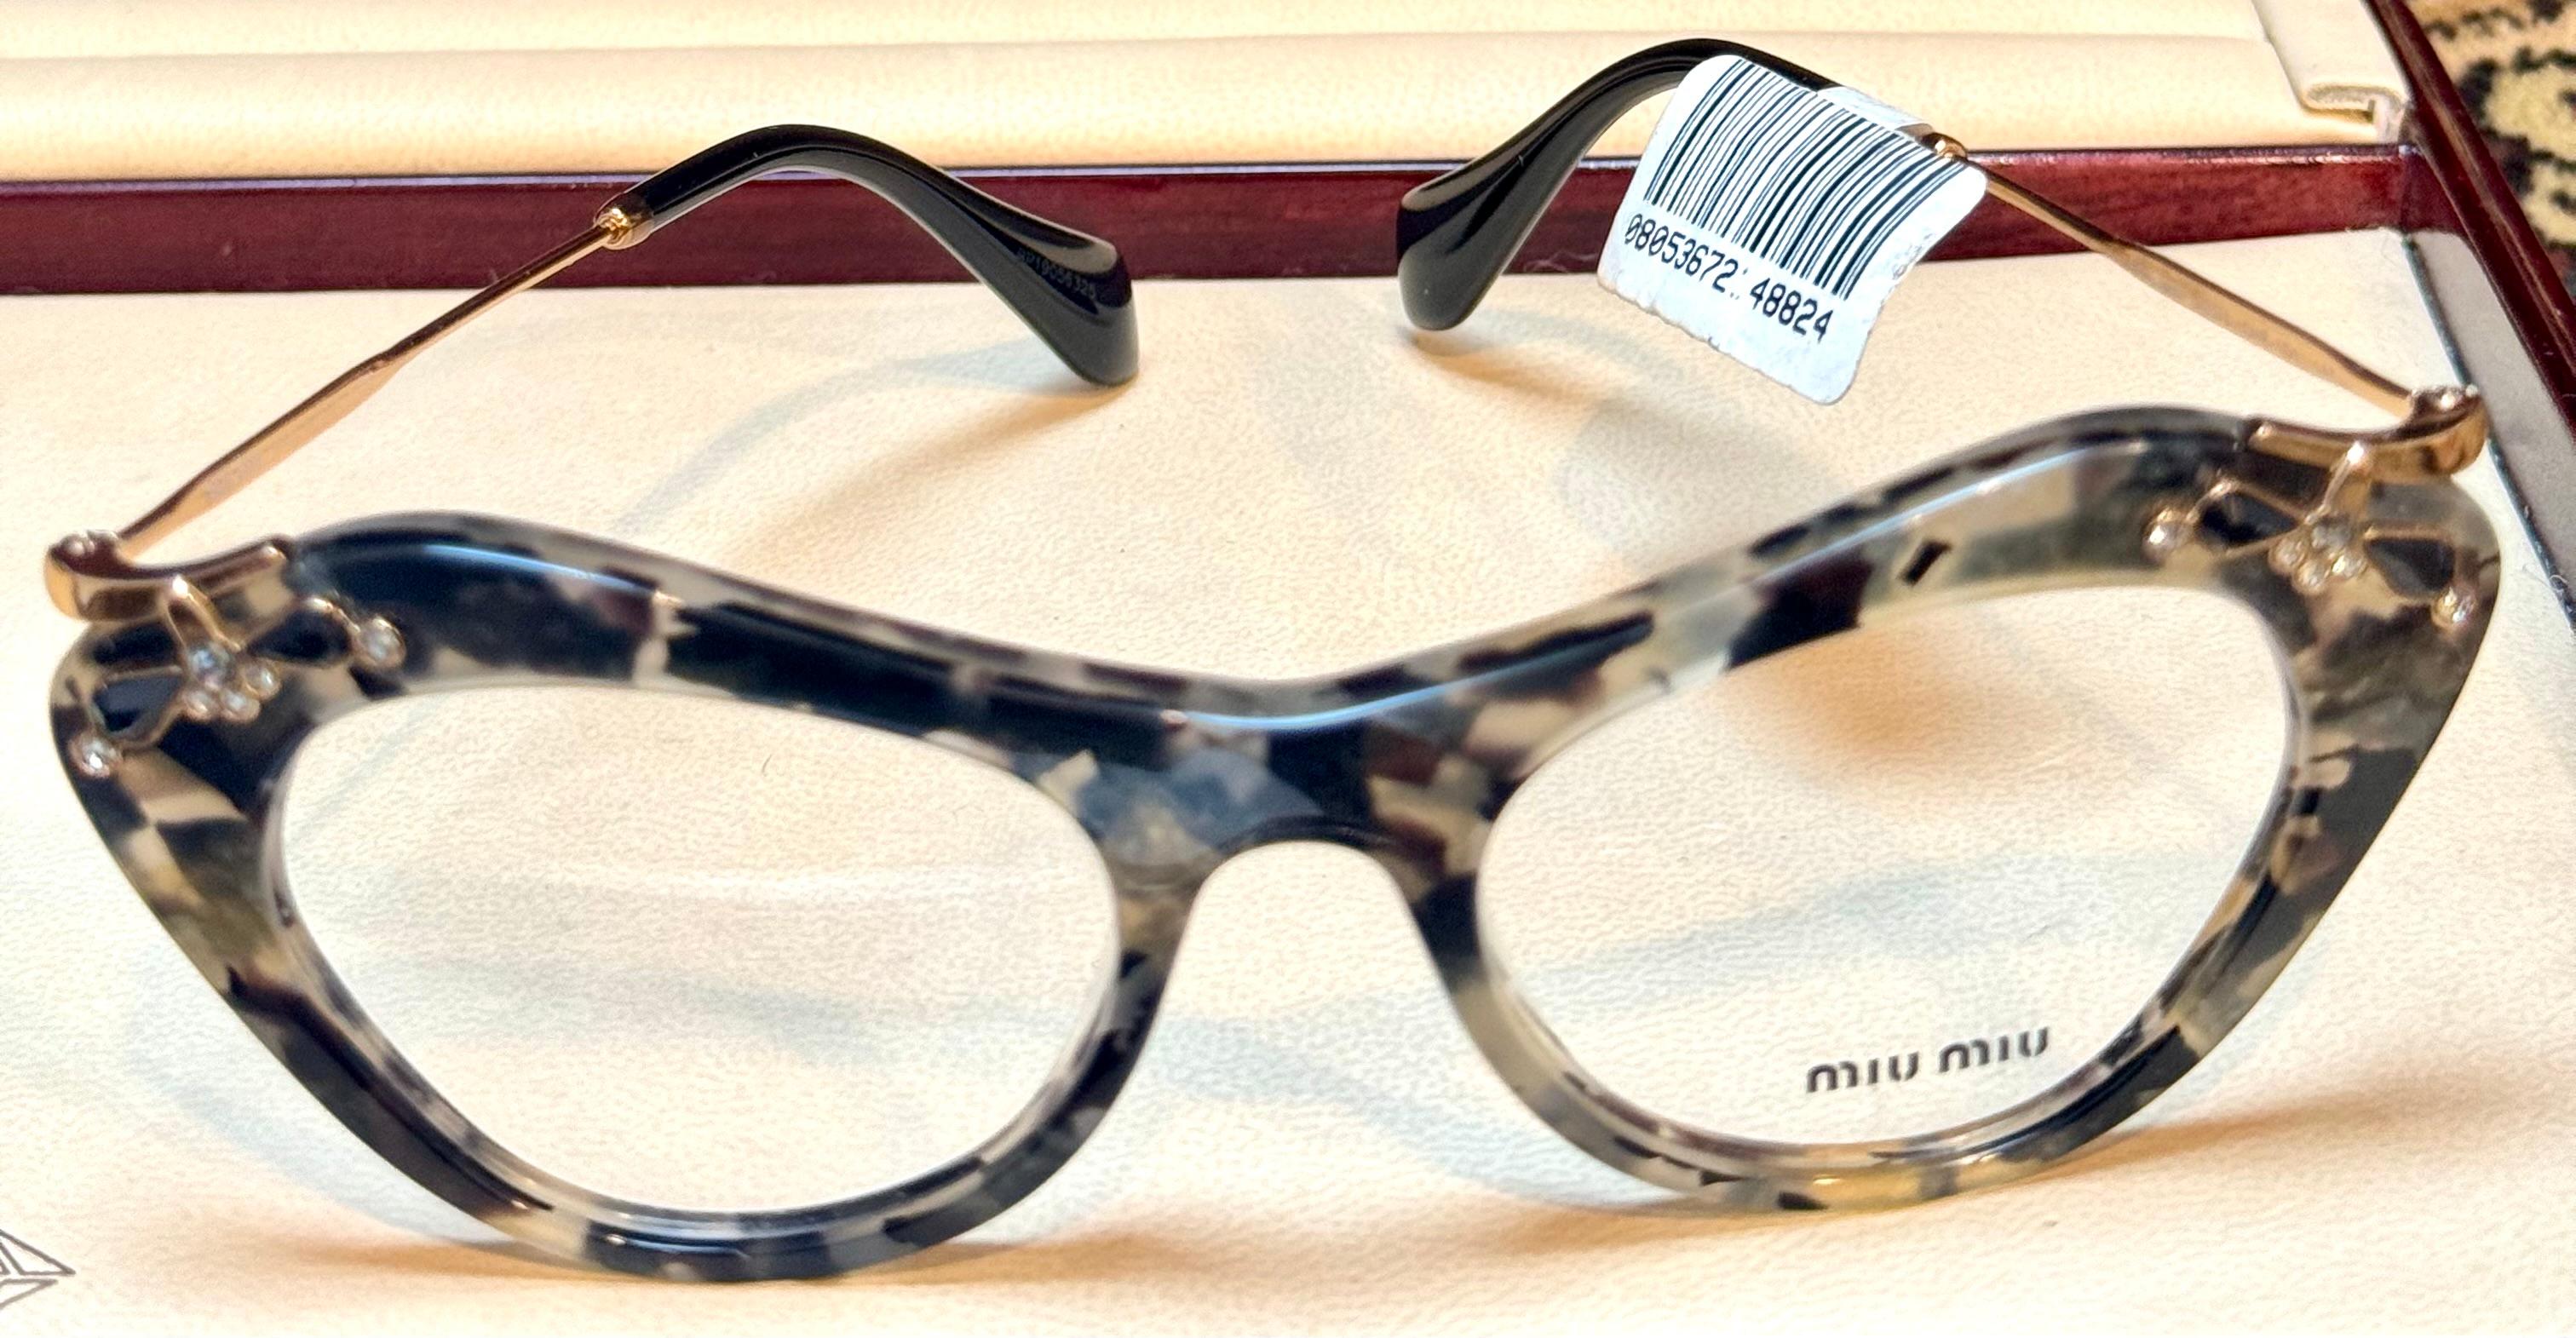 
Miu Miu MU 09MV DHE1O1 Grey/Black  Optical Eyeglasses 49/19/140, Ornated with black and white stones
Gender: Unisex

Directed to younger generations, Miu Miu is tailored for hip, spirited individuals that aren’t afraid to stand out. A free-spirited